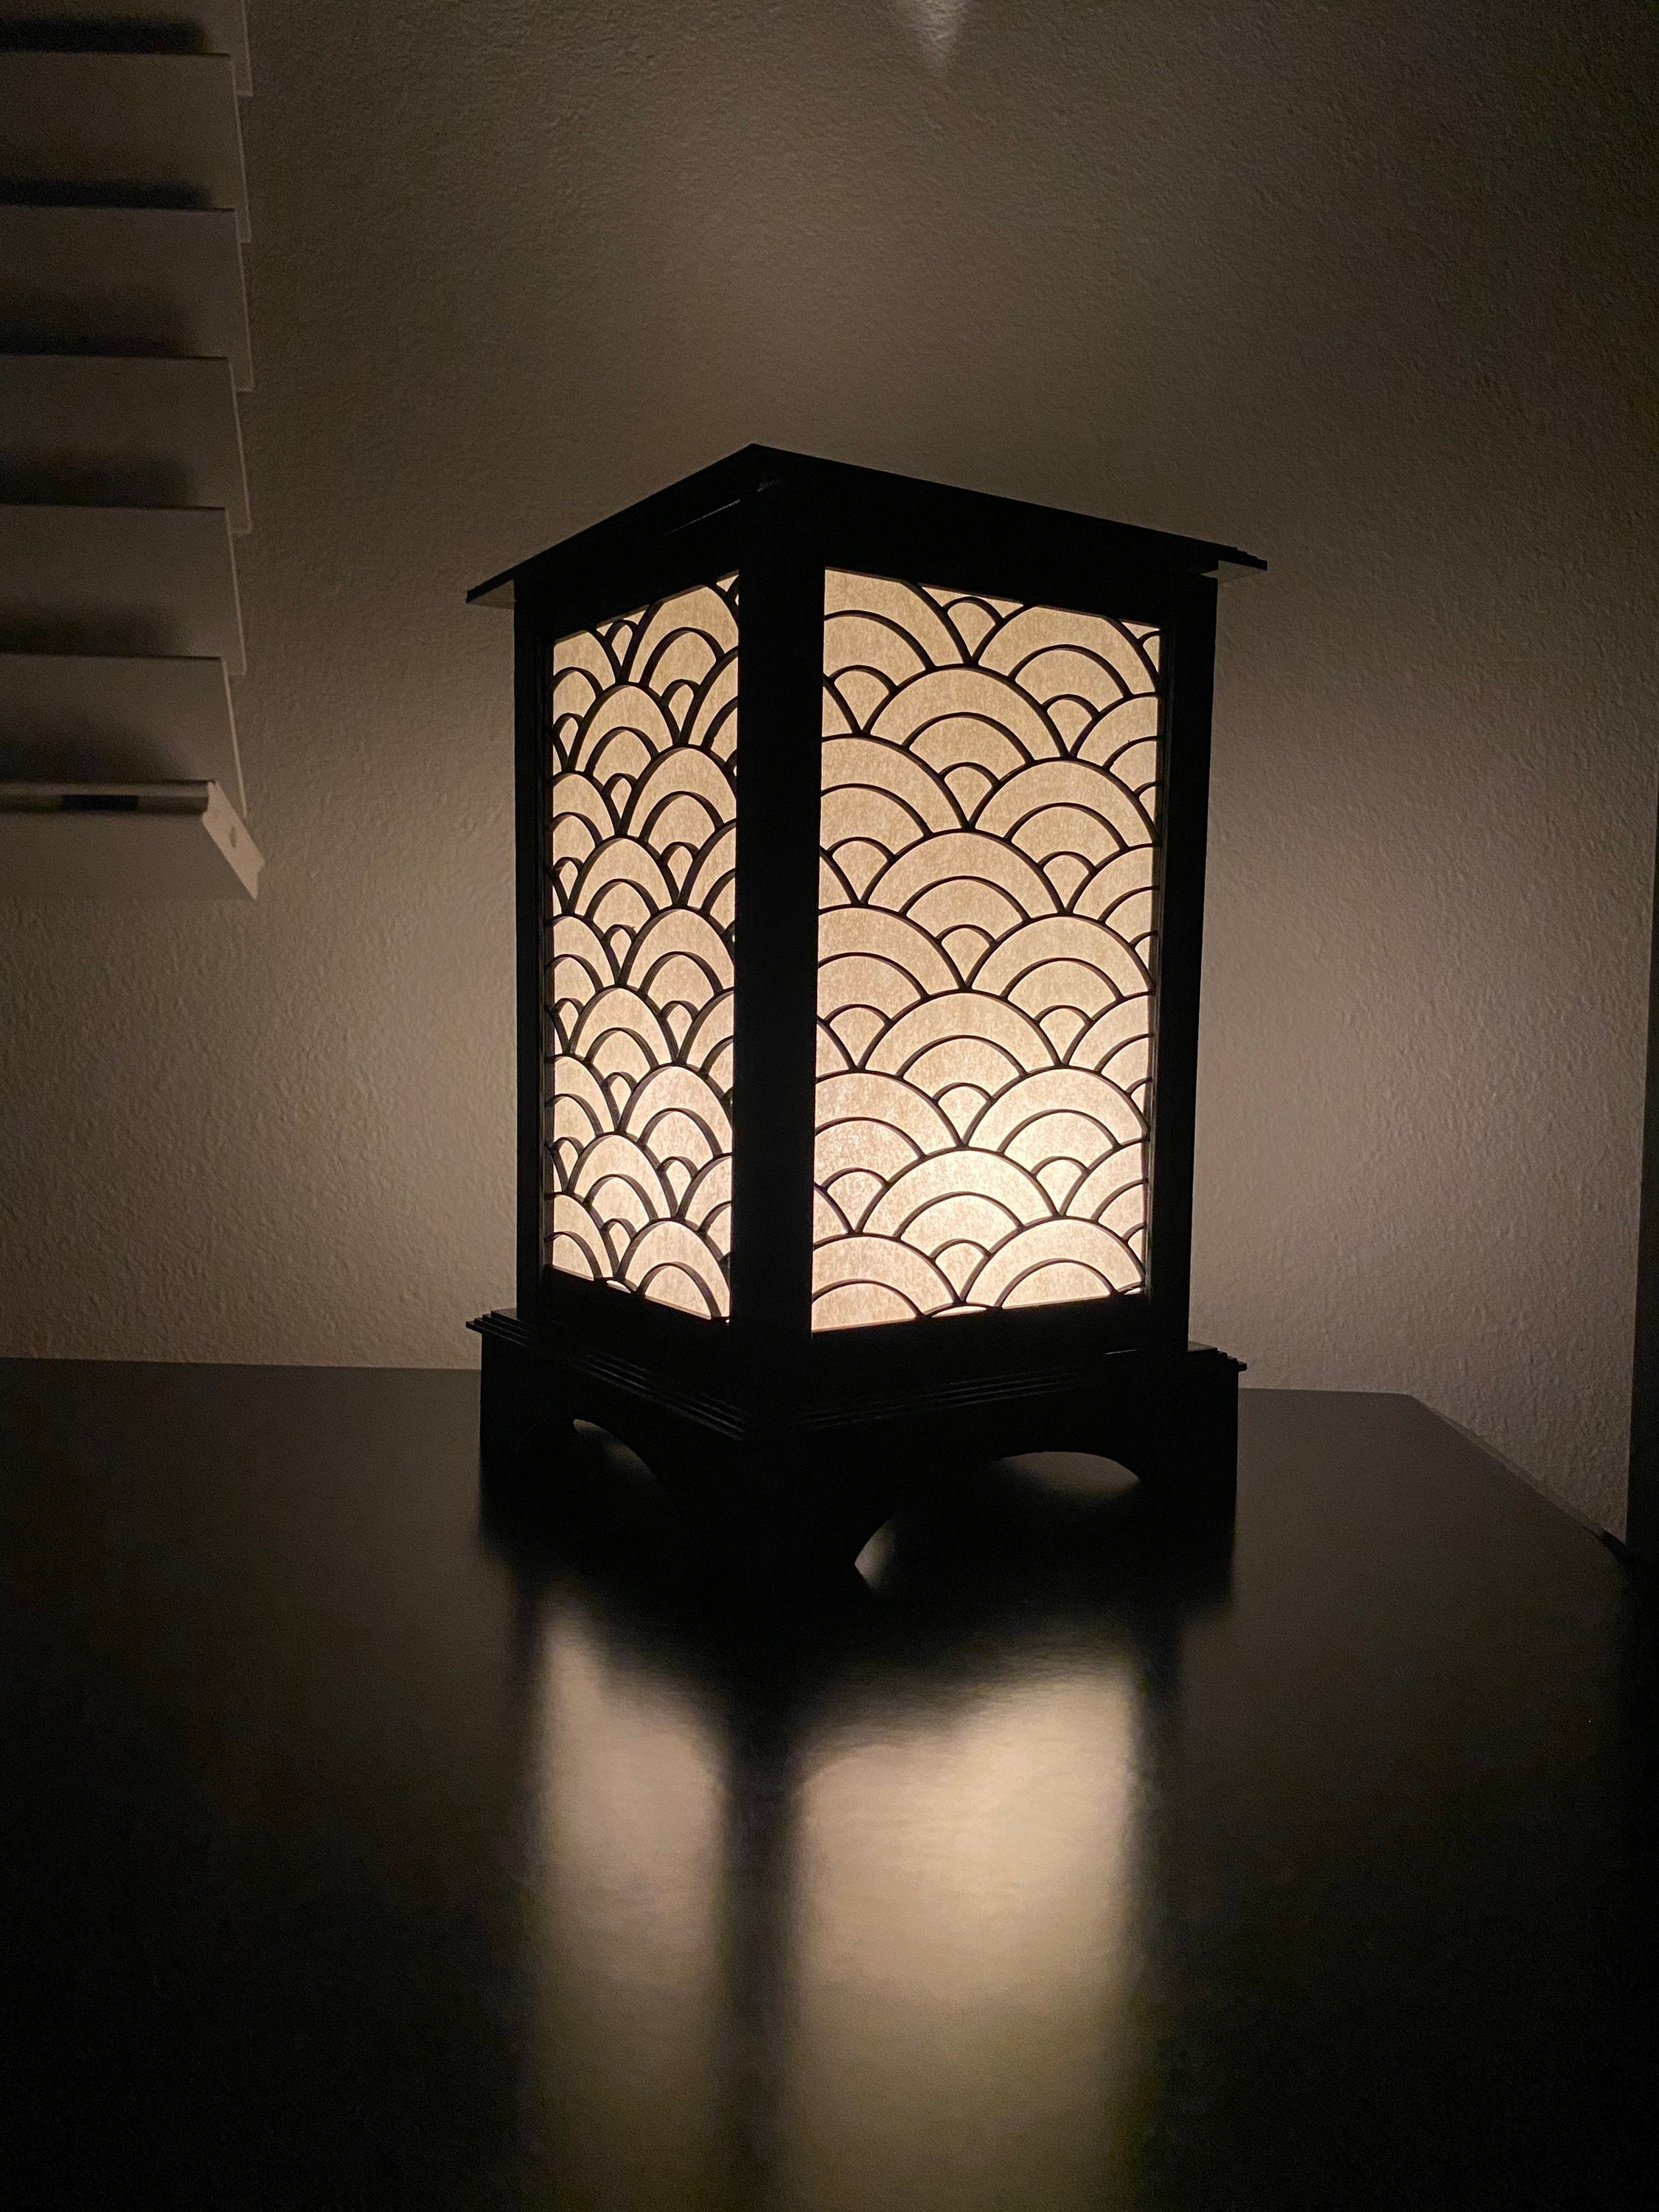 Set OfSmall Electric Japanese Wood & Paper Lanterns For Use In Home Sh –  Shogun's Gallery